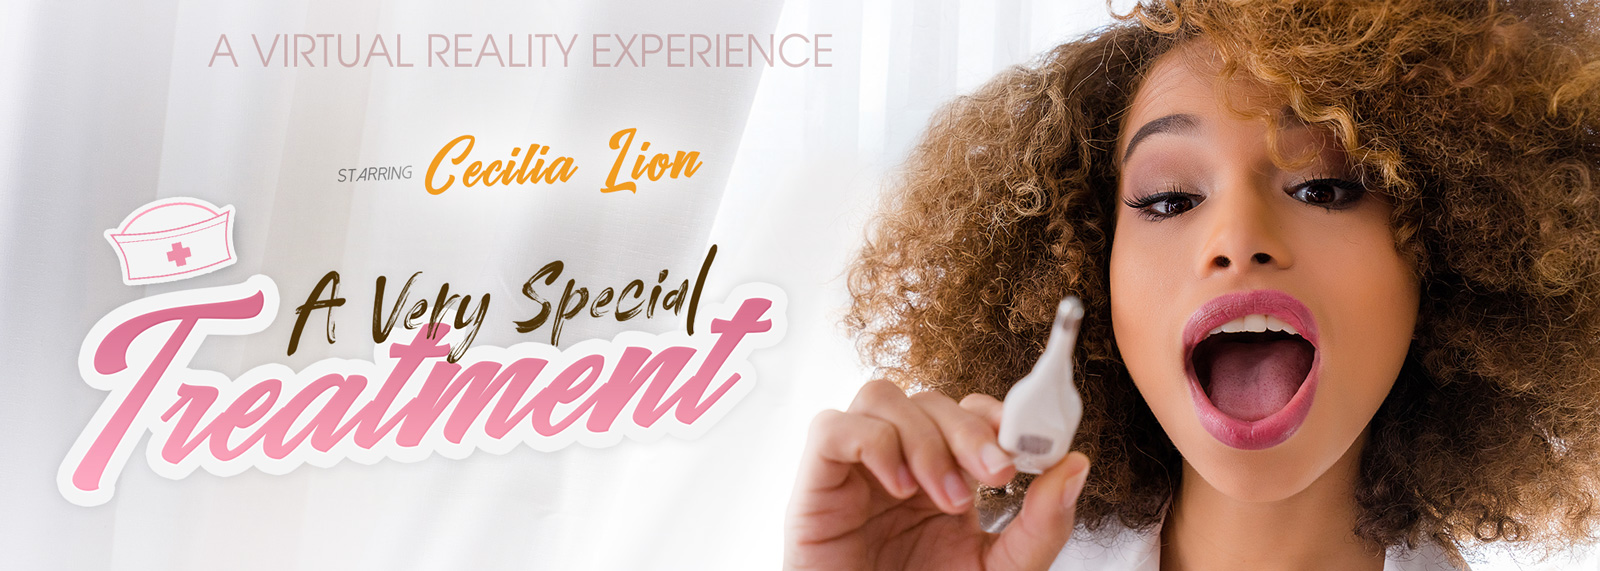 A Very Special Treatment with Cecilia Lion  Slideshow